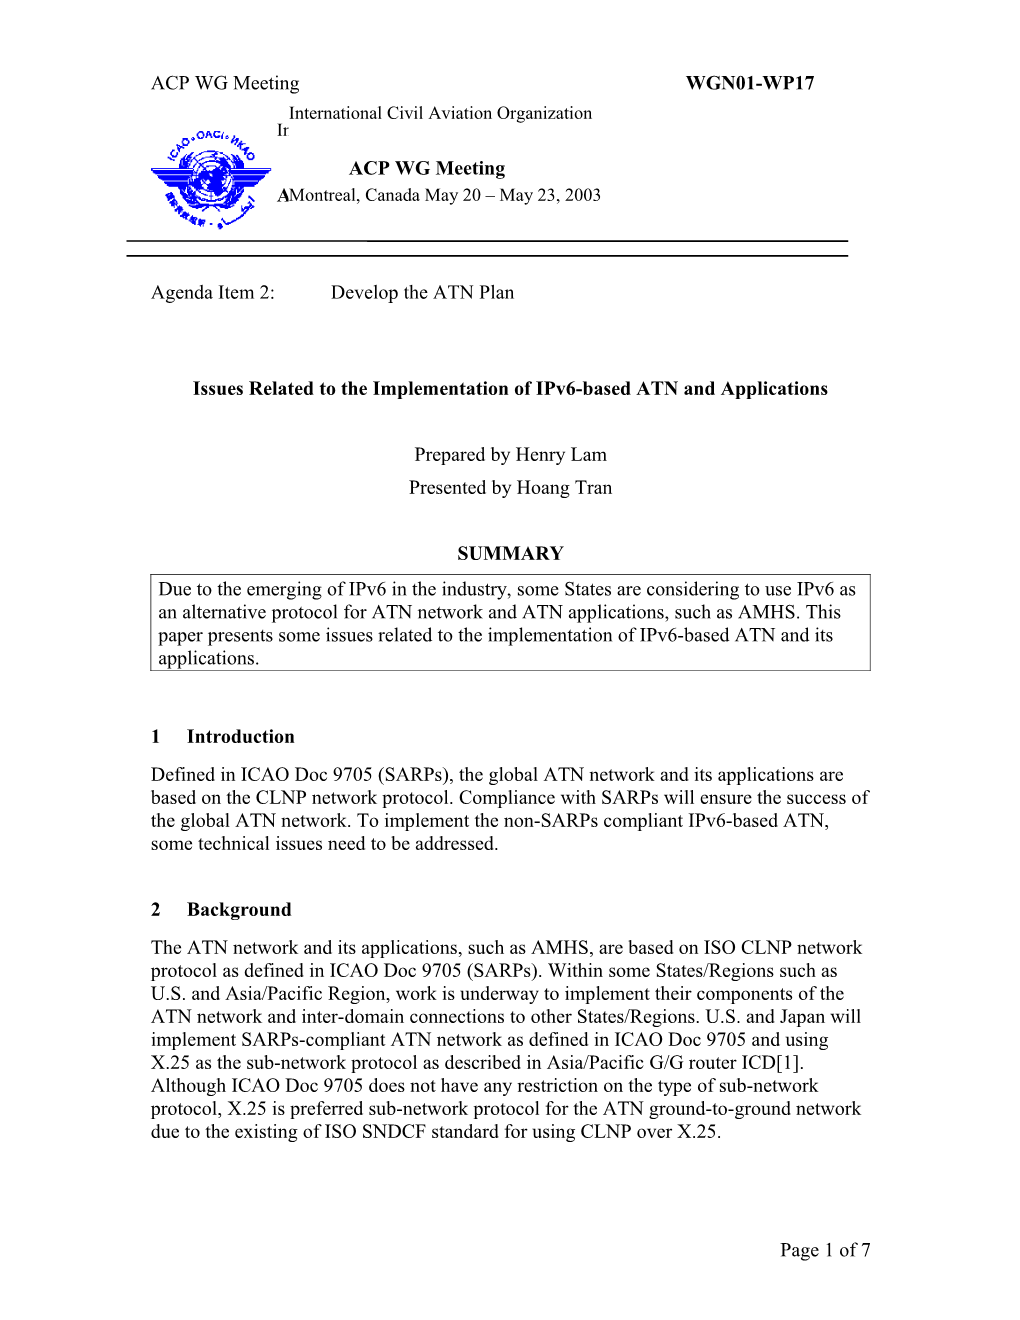 Issues Related to the Implementation of Ipv6-Based ATN and Applications